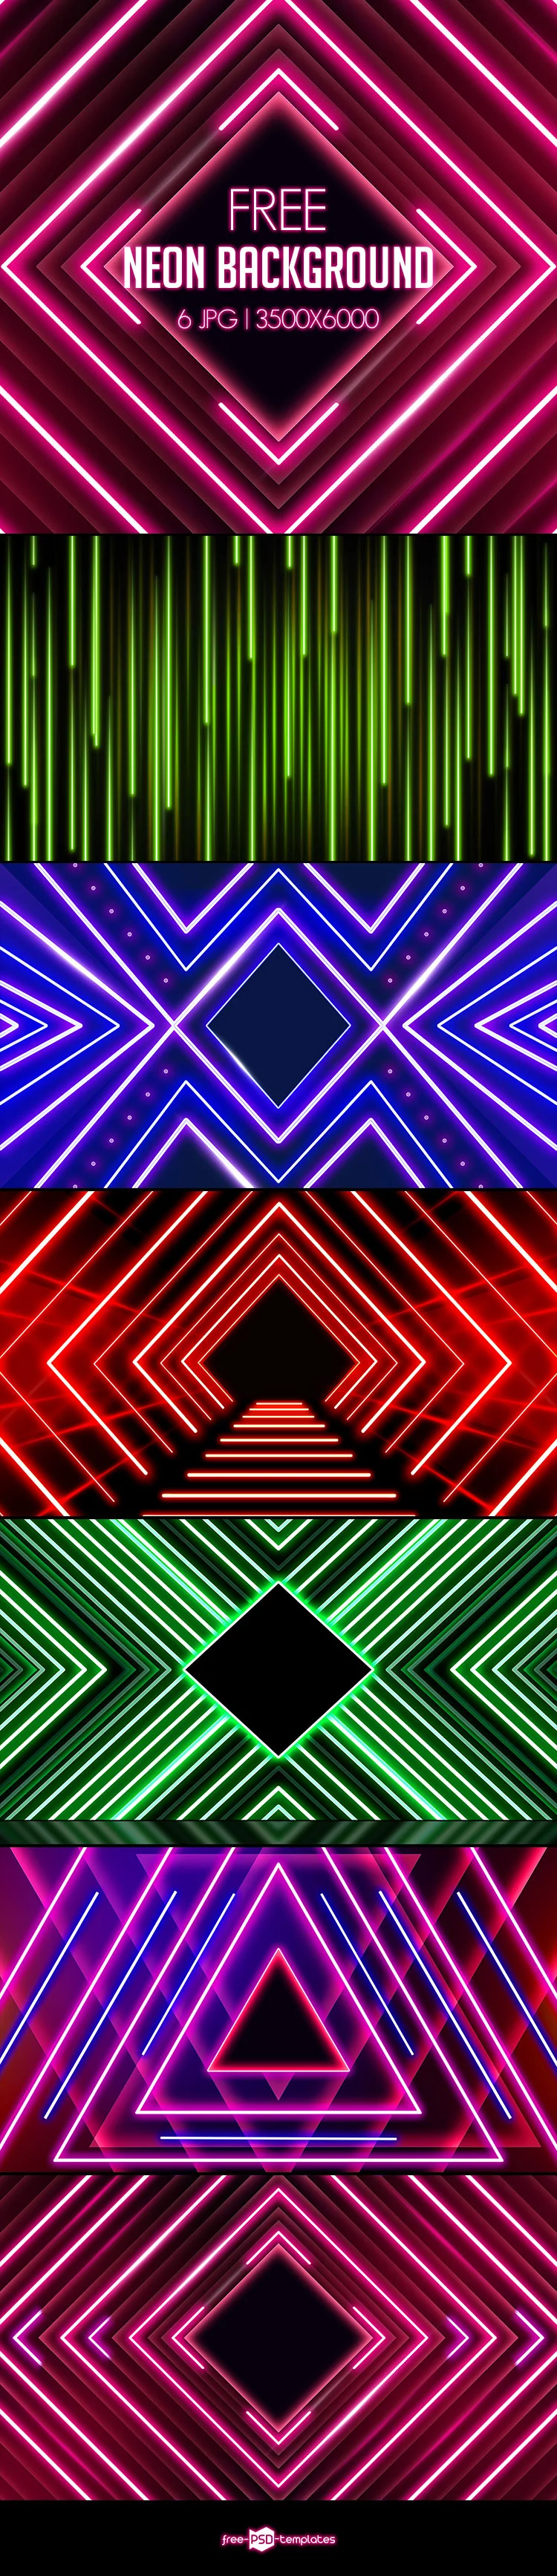 6 Free Neon Backgrounds